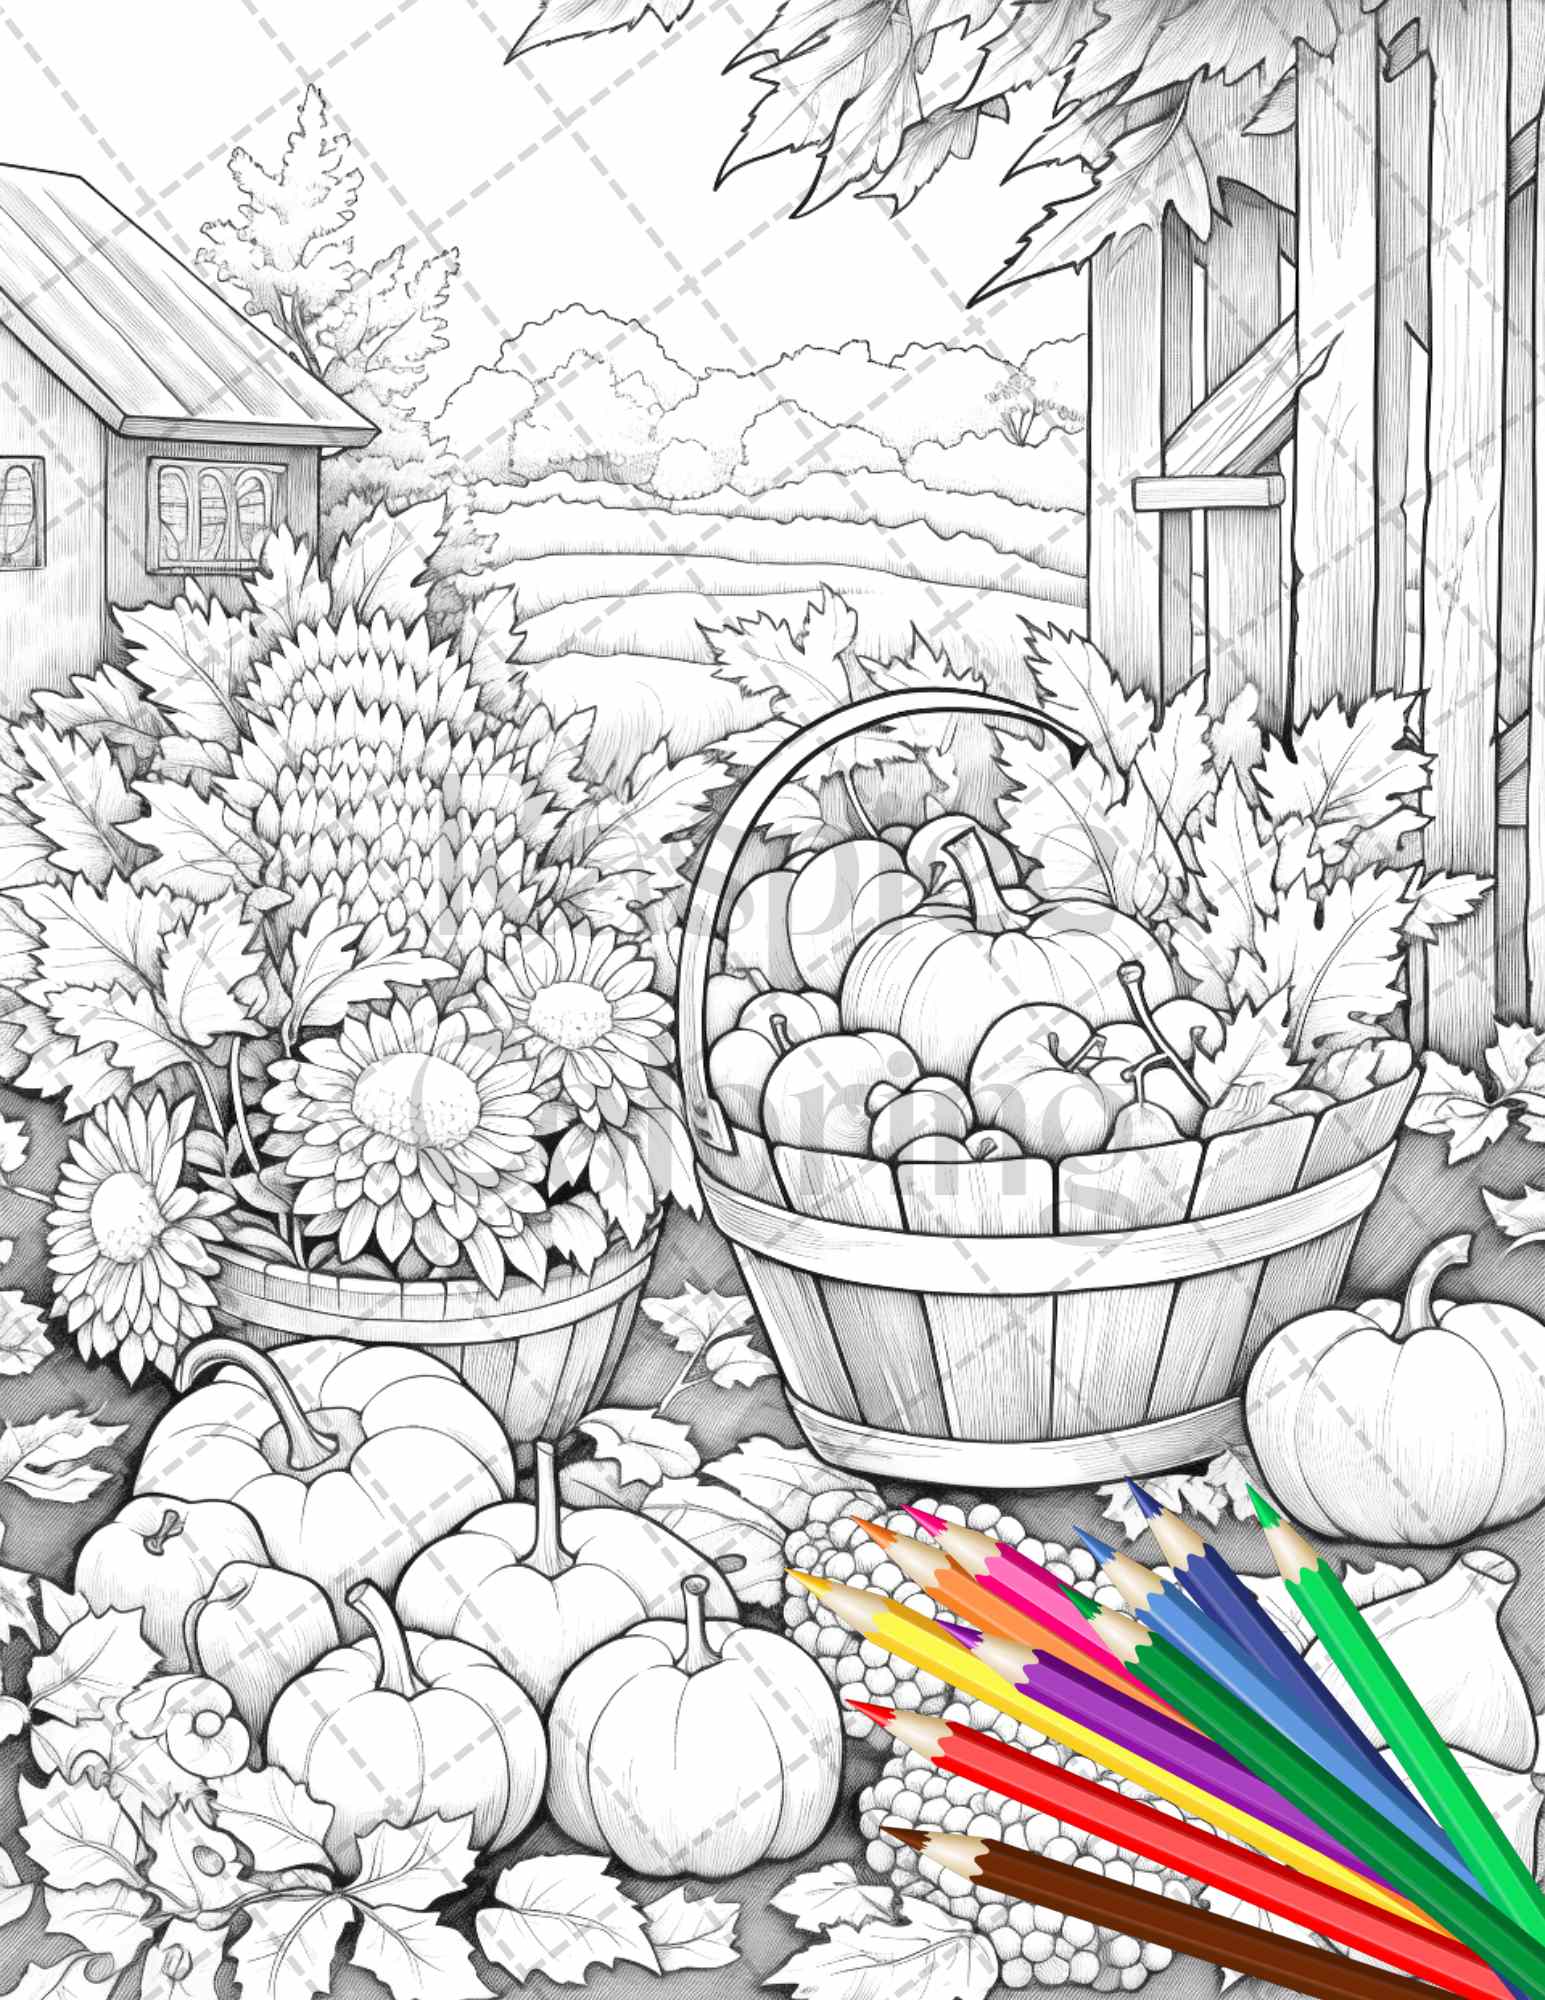 Autumn Harvest Grayscale Coloring Pages Printable for Adults, Relaxing Fall Themed Art, PDF File Instant Download - raspiee